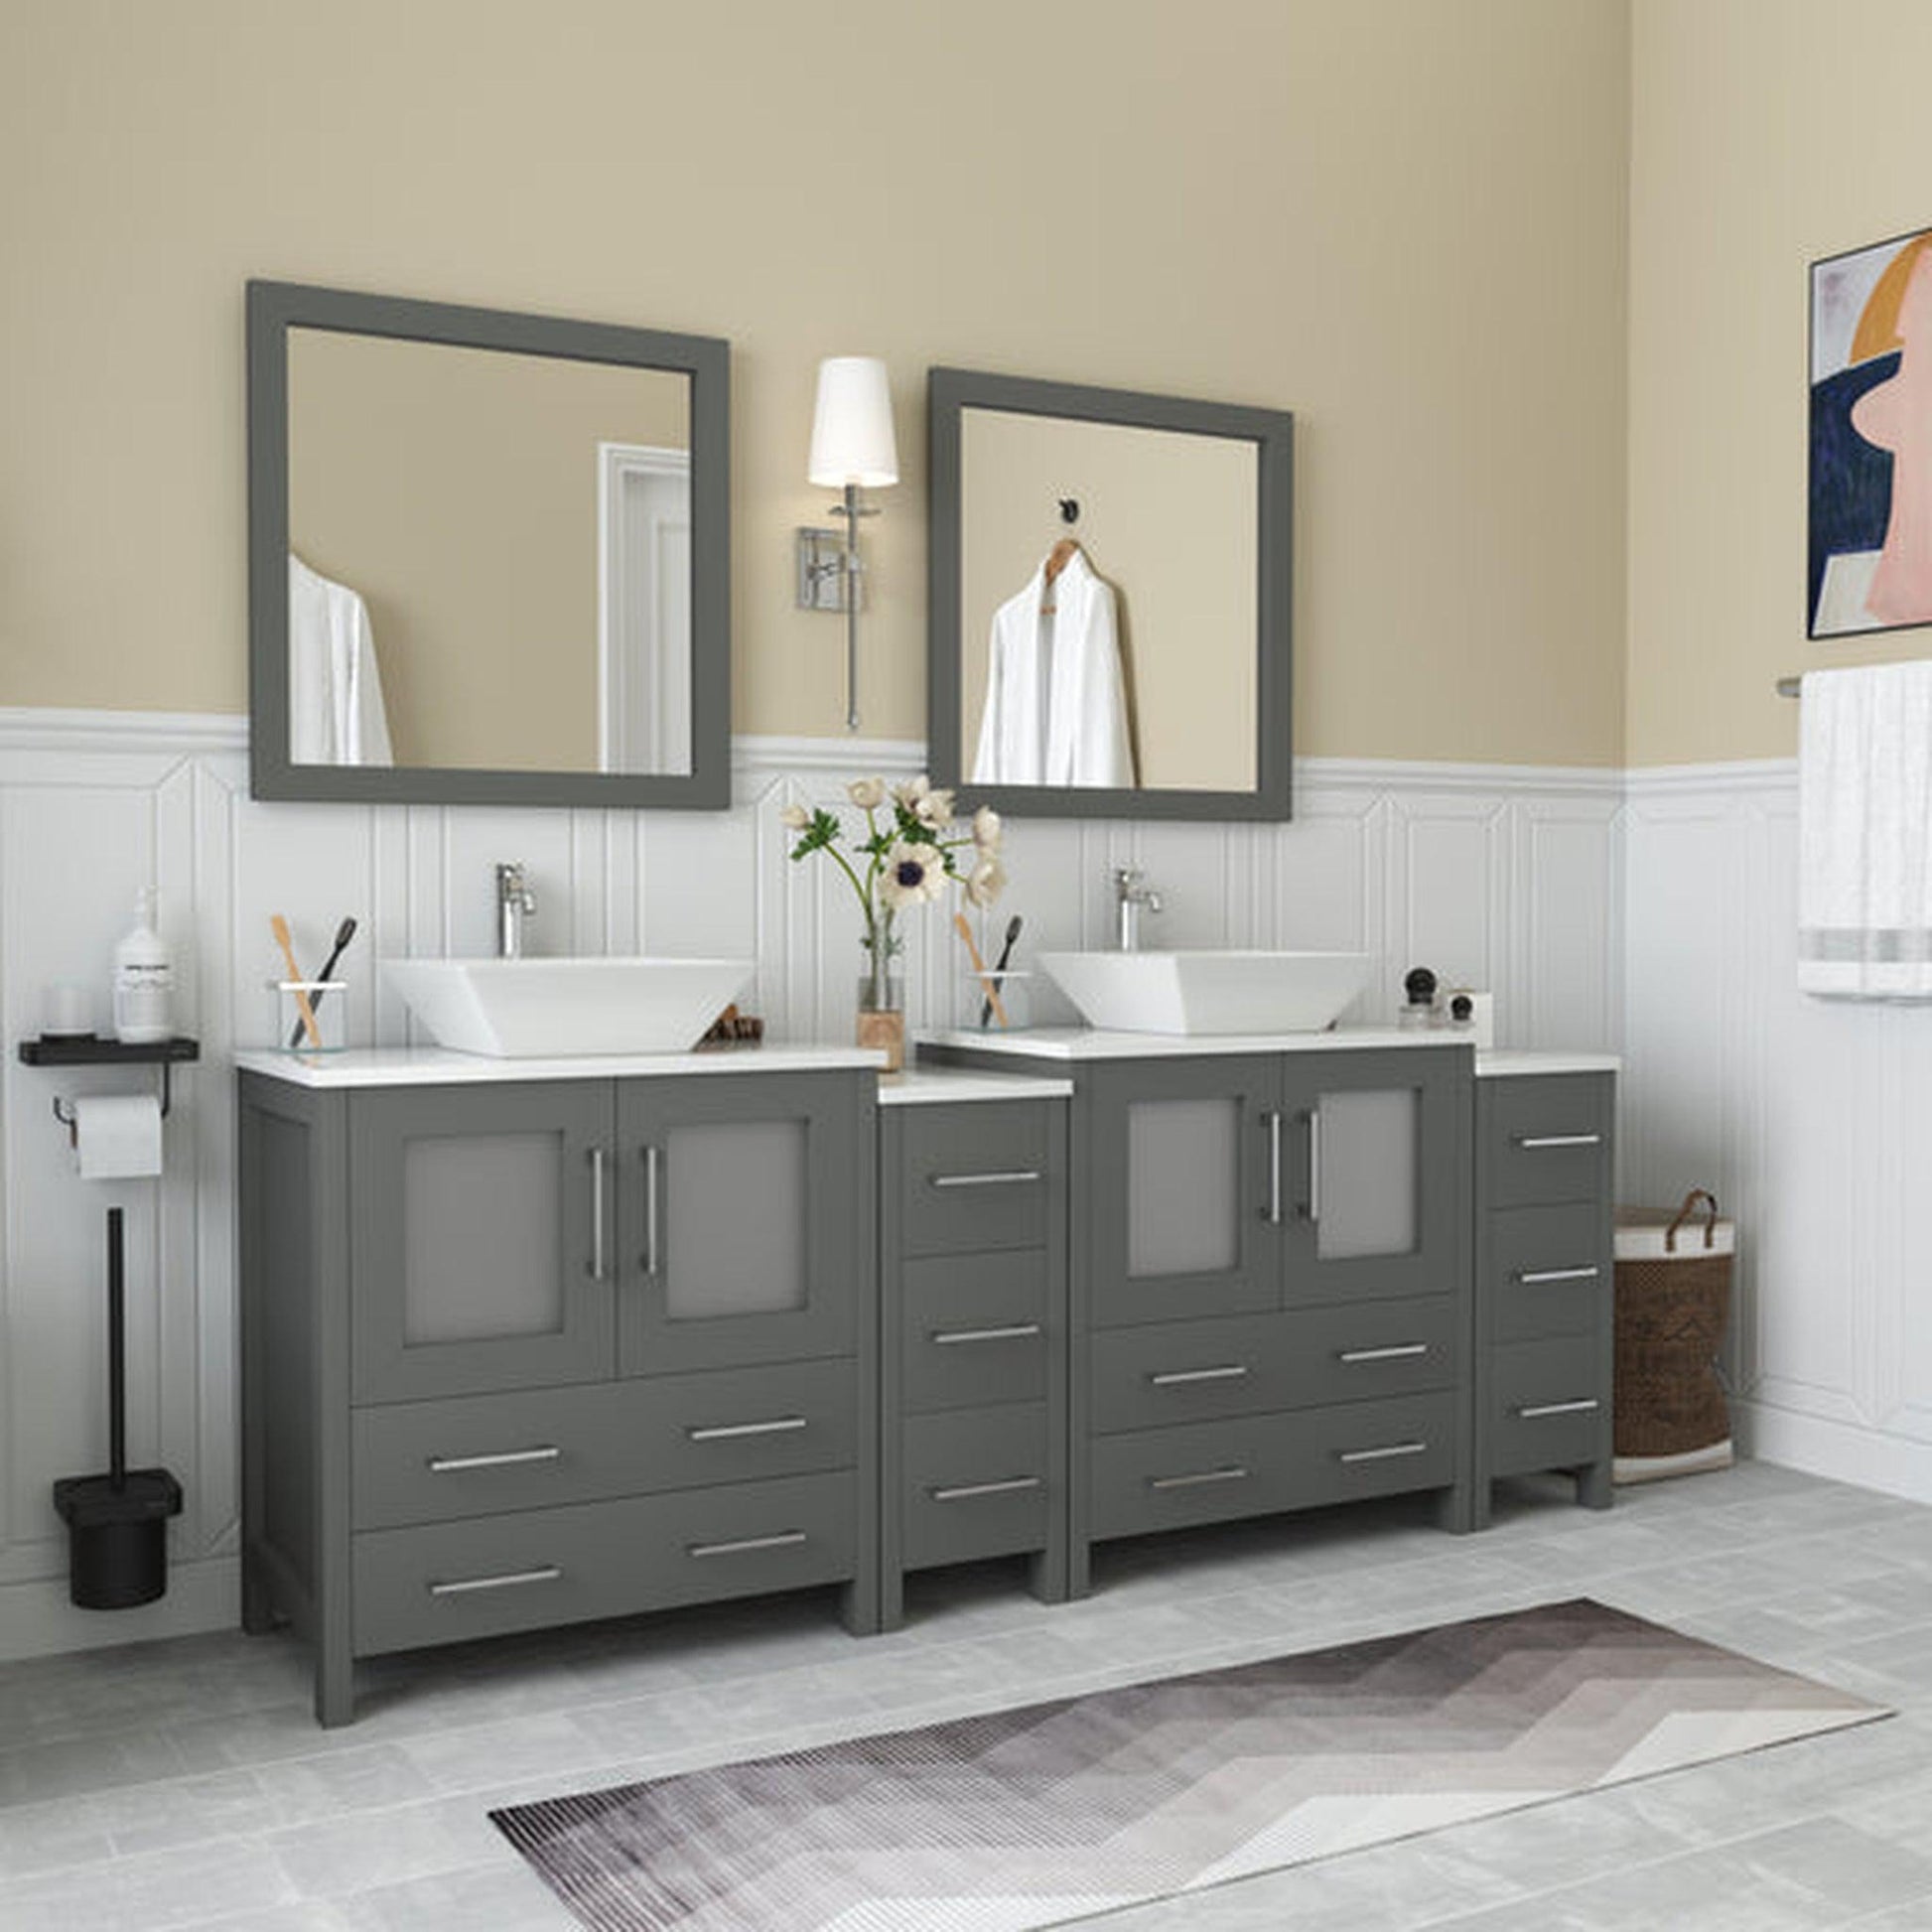 Vanity Art Ravenna 84" Double Gray Freestanding Vanity Set With White Engineered Marble Top, 2 Ceramic Vessel Sinks, 2 Side Cabinets and 2 Mirrors